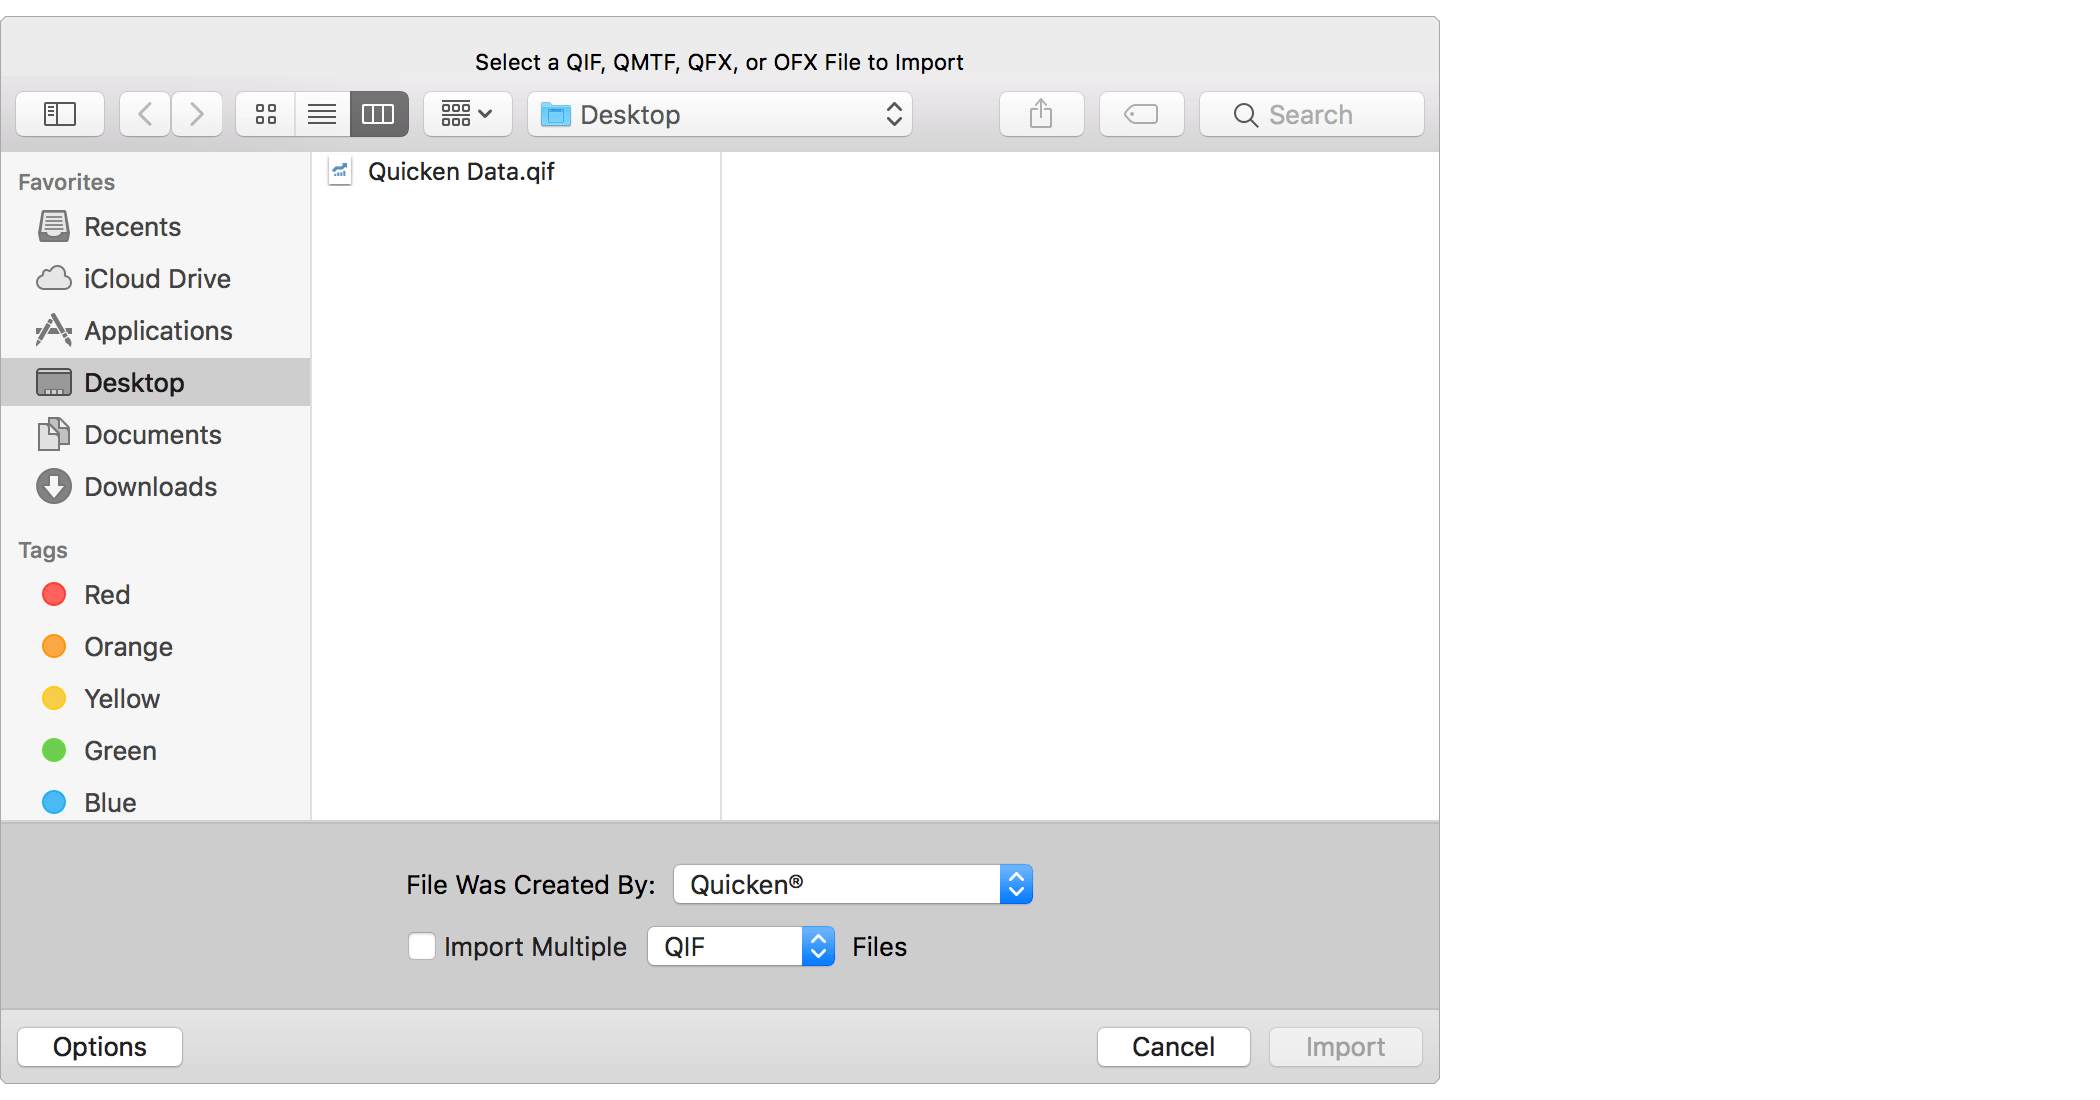 Select File to Import